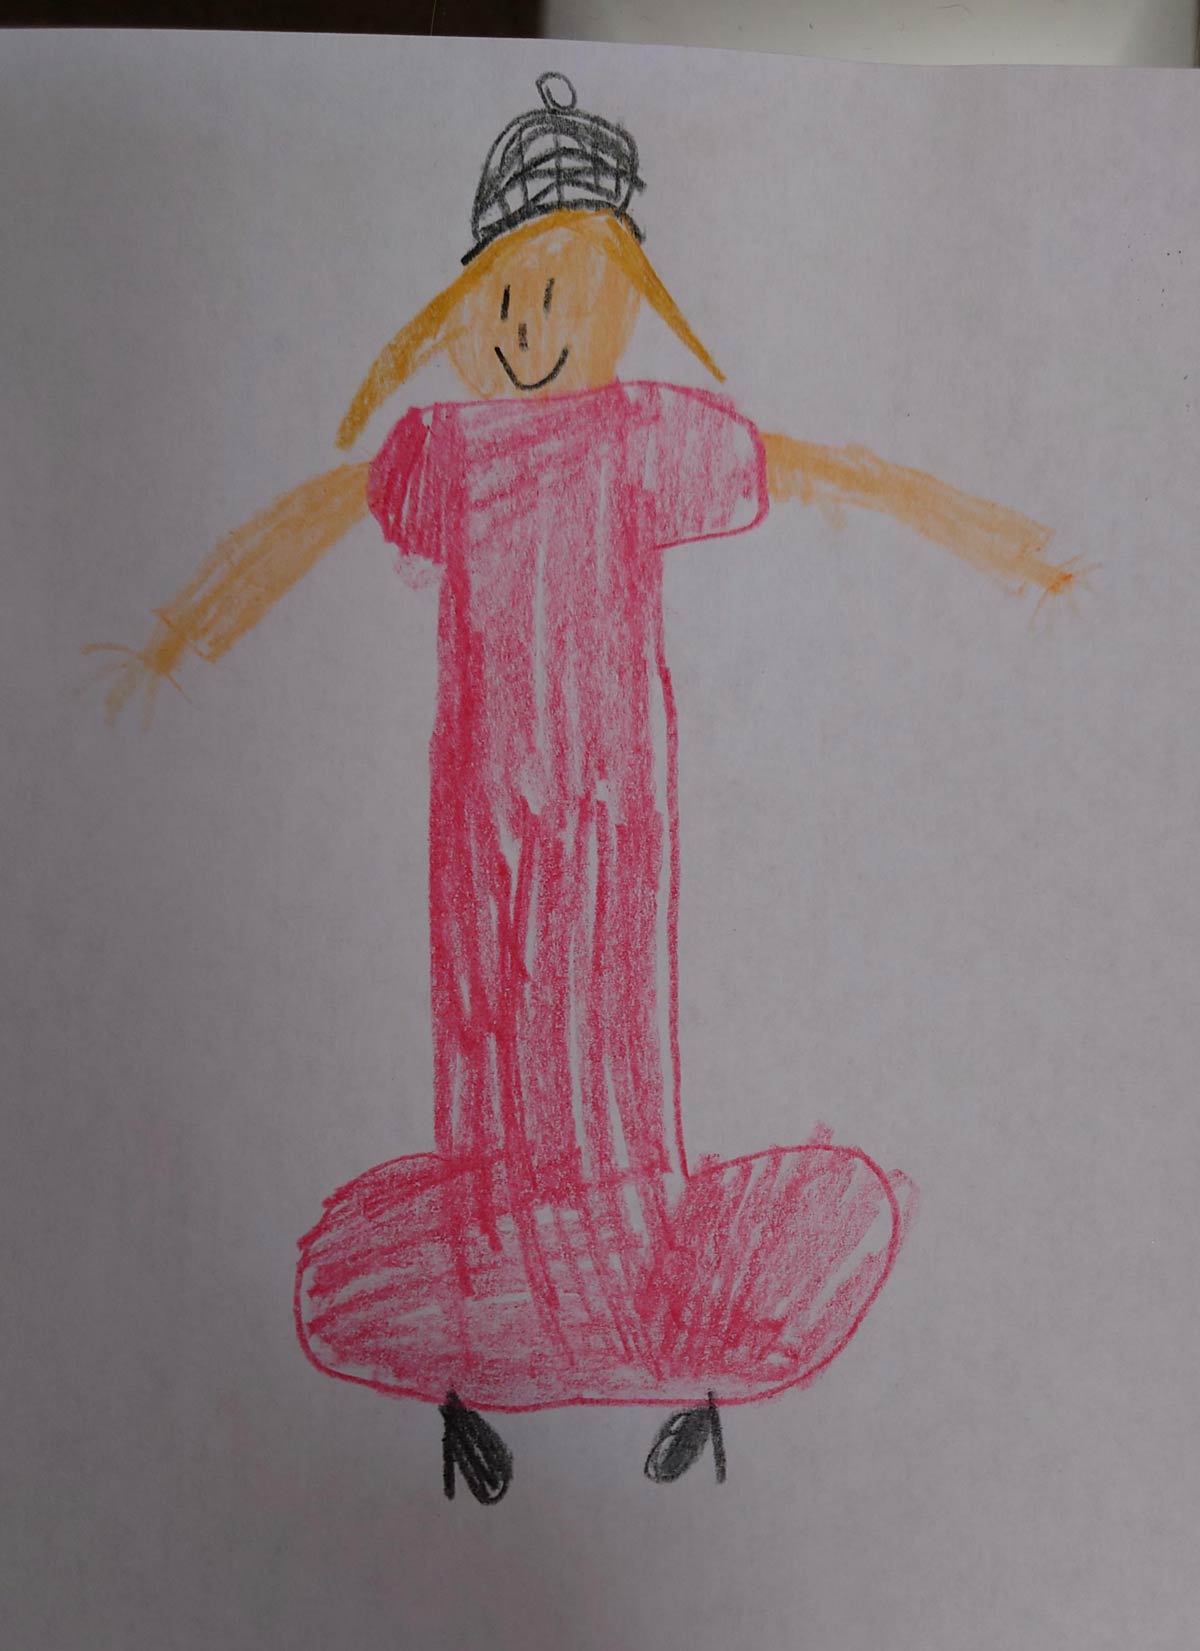 My niece drew a picture of Mariah Carey from the parade